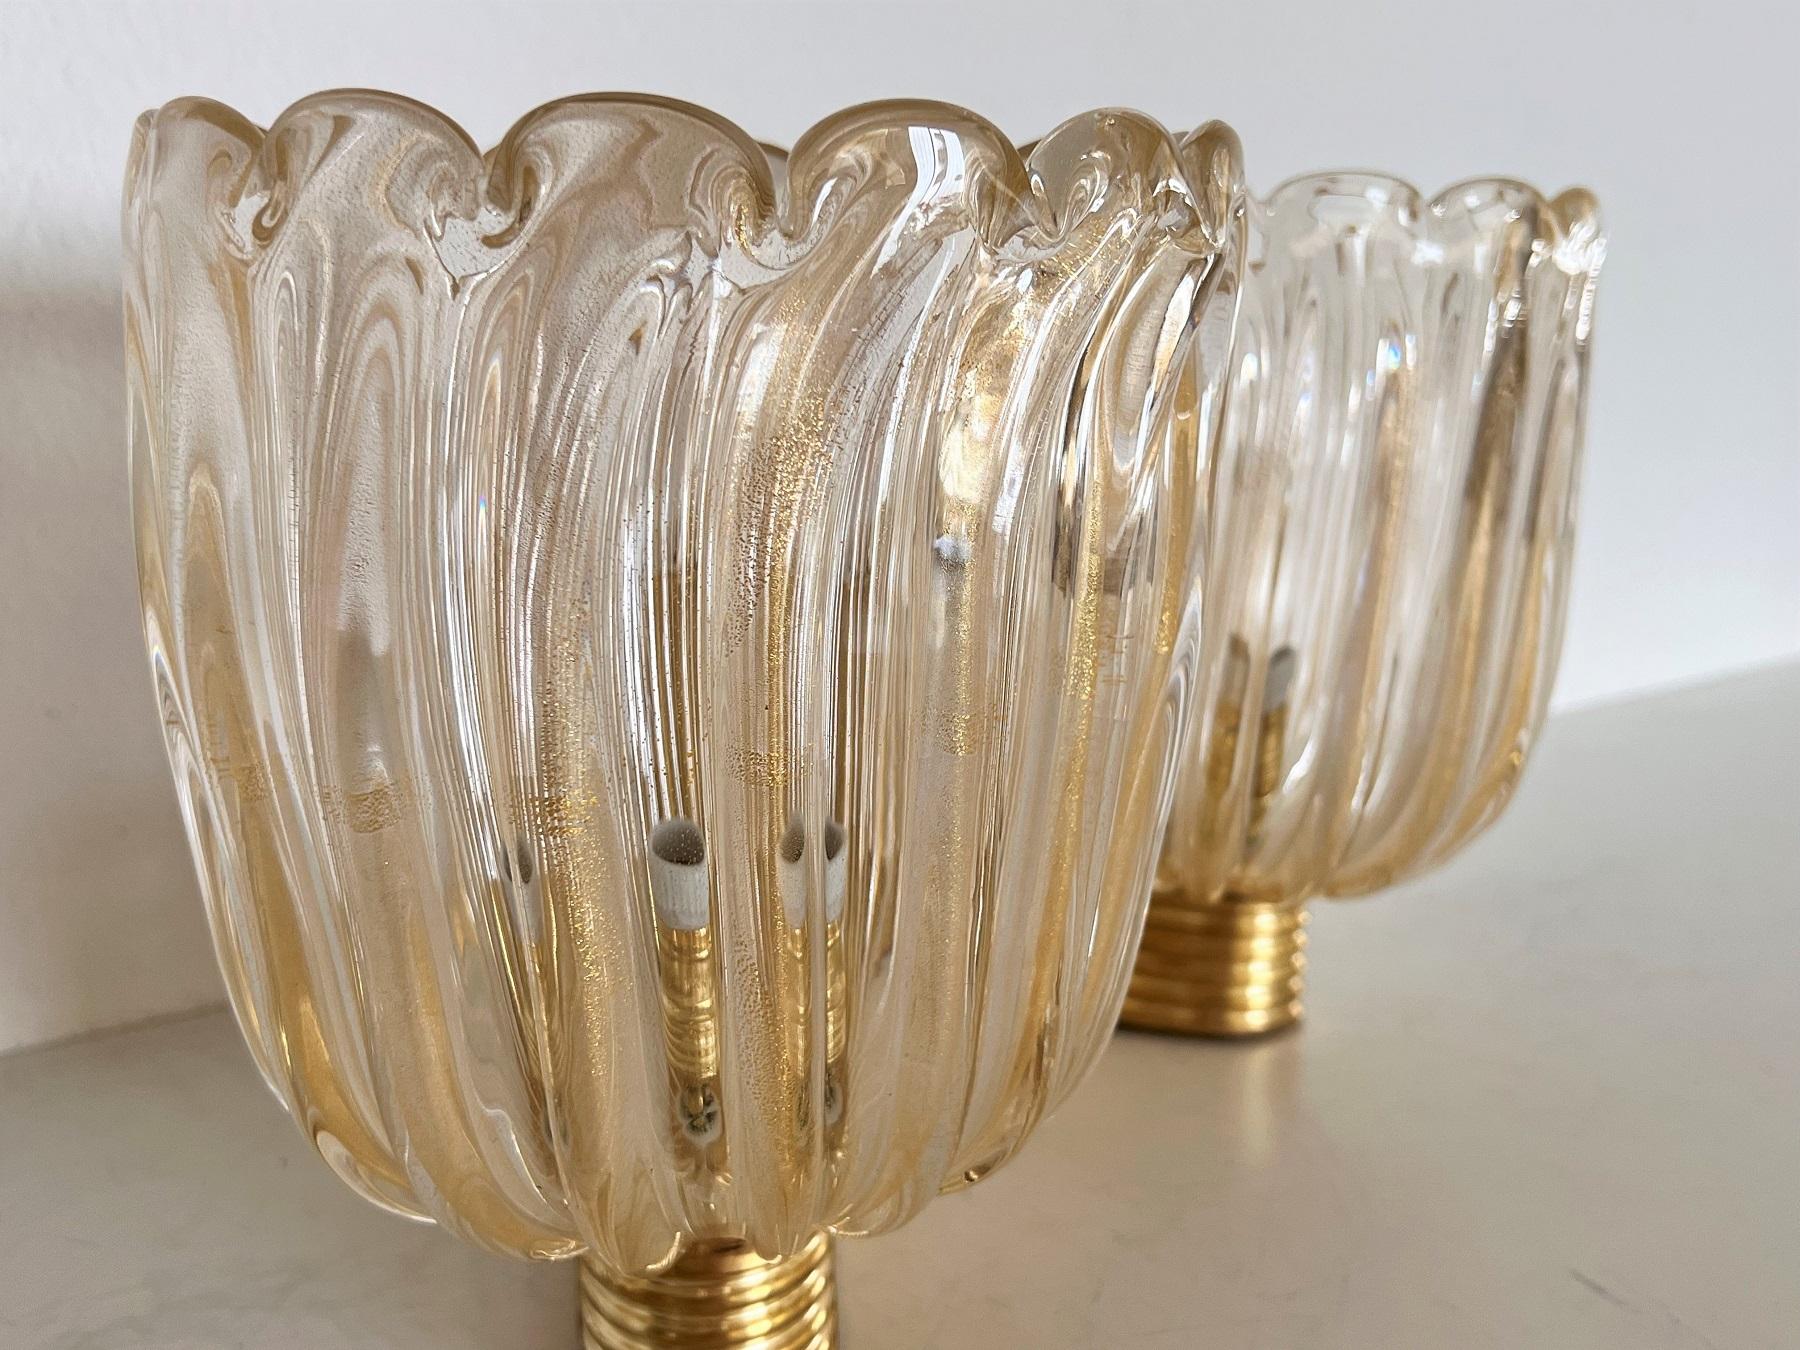 Italian Brass and Murano Glass Wall Lights or Sconces in Art Deco Style, 1990s 2